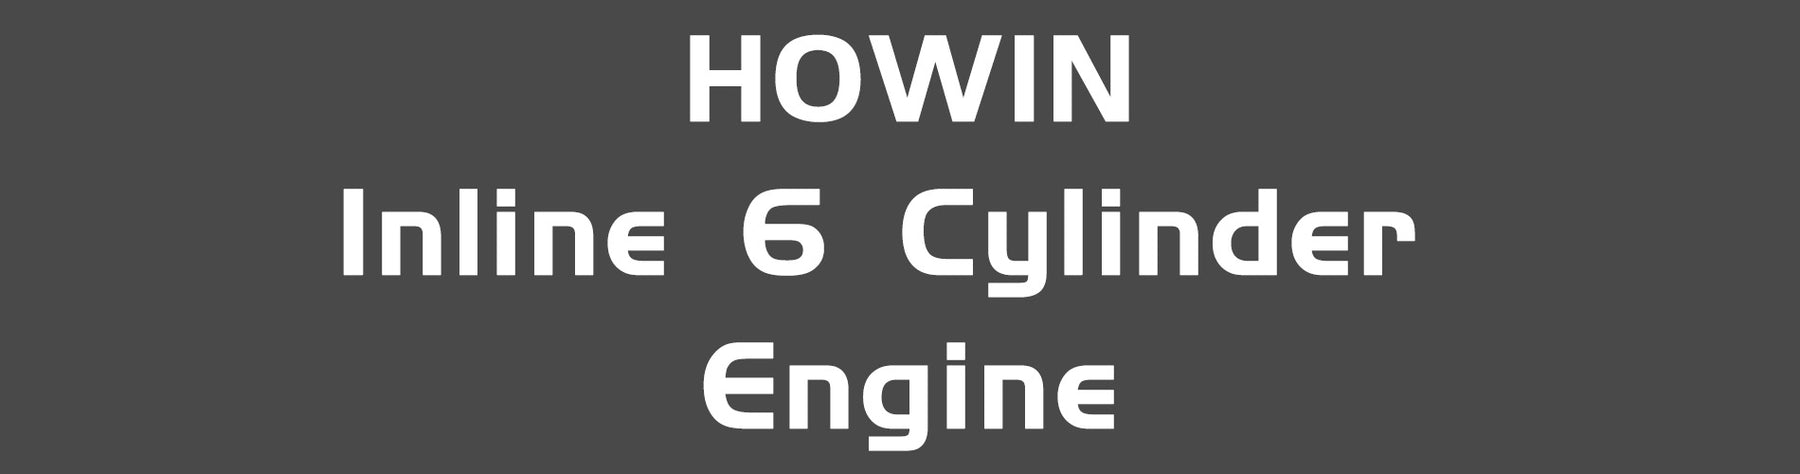 HOWIN First L6 Engine Will Be Released in 2022? - EngineDIY